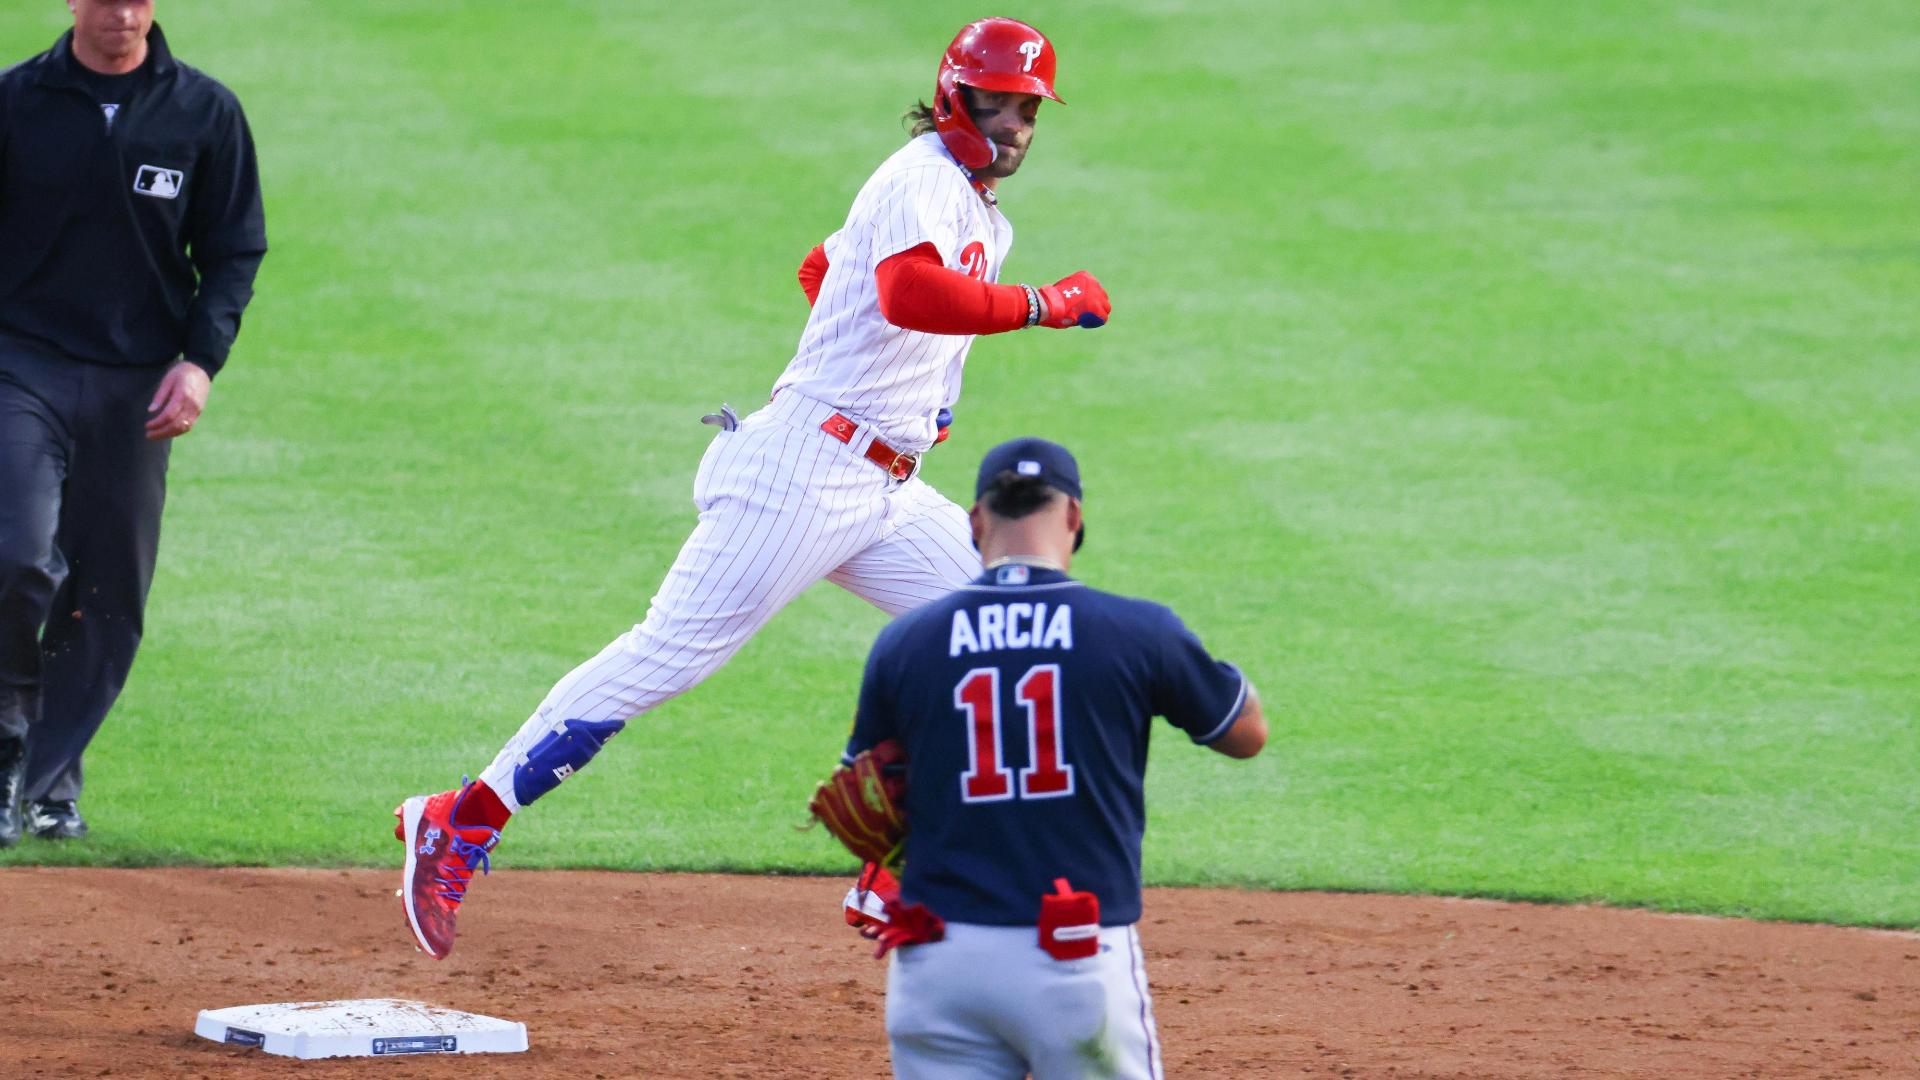 Phillies designated hitter Bryce Harper stares at Braves shortstop Orlando Arcia as he rounds second base in the 2023 MLB National League Divison Series. The Phillies would go on to defeat the Braves and move on to the next round in the playoffs. Image courtesy of ESPN's website.